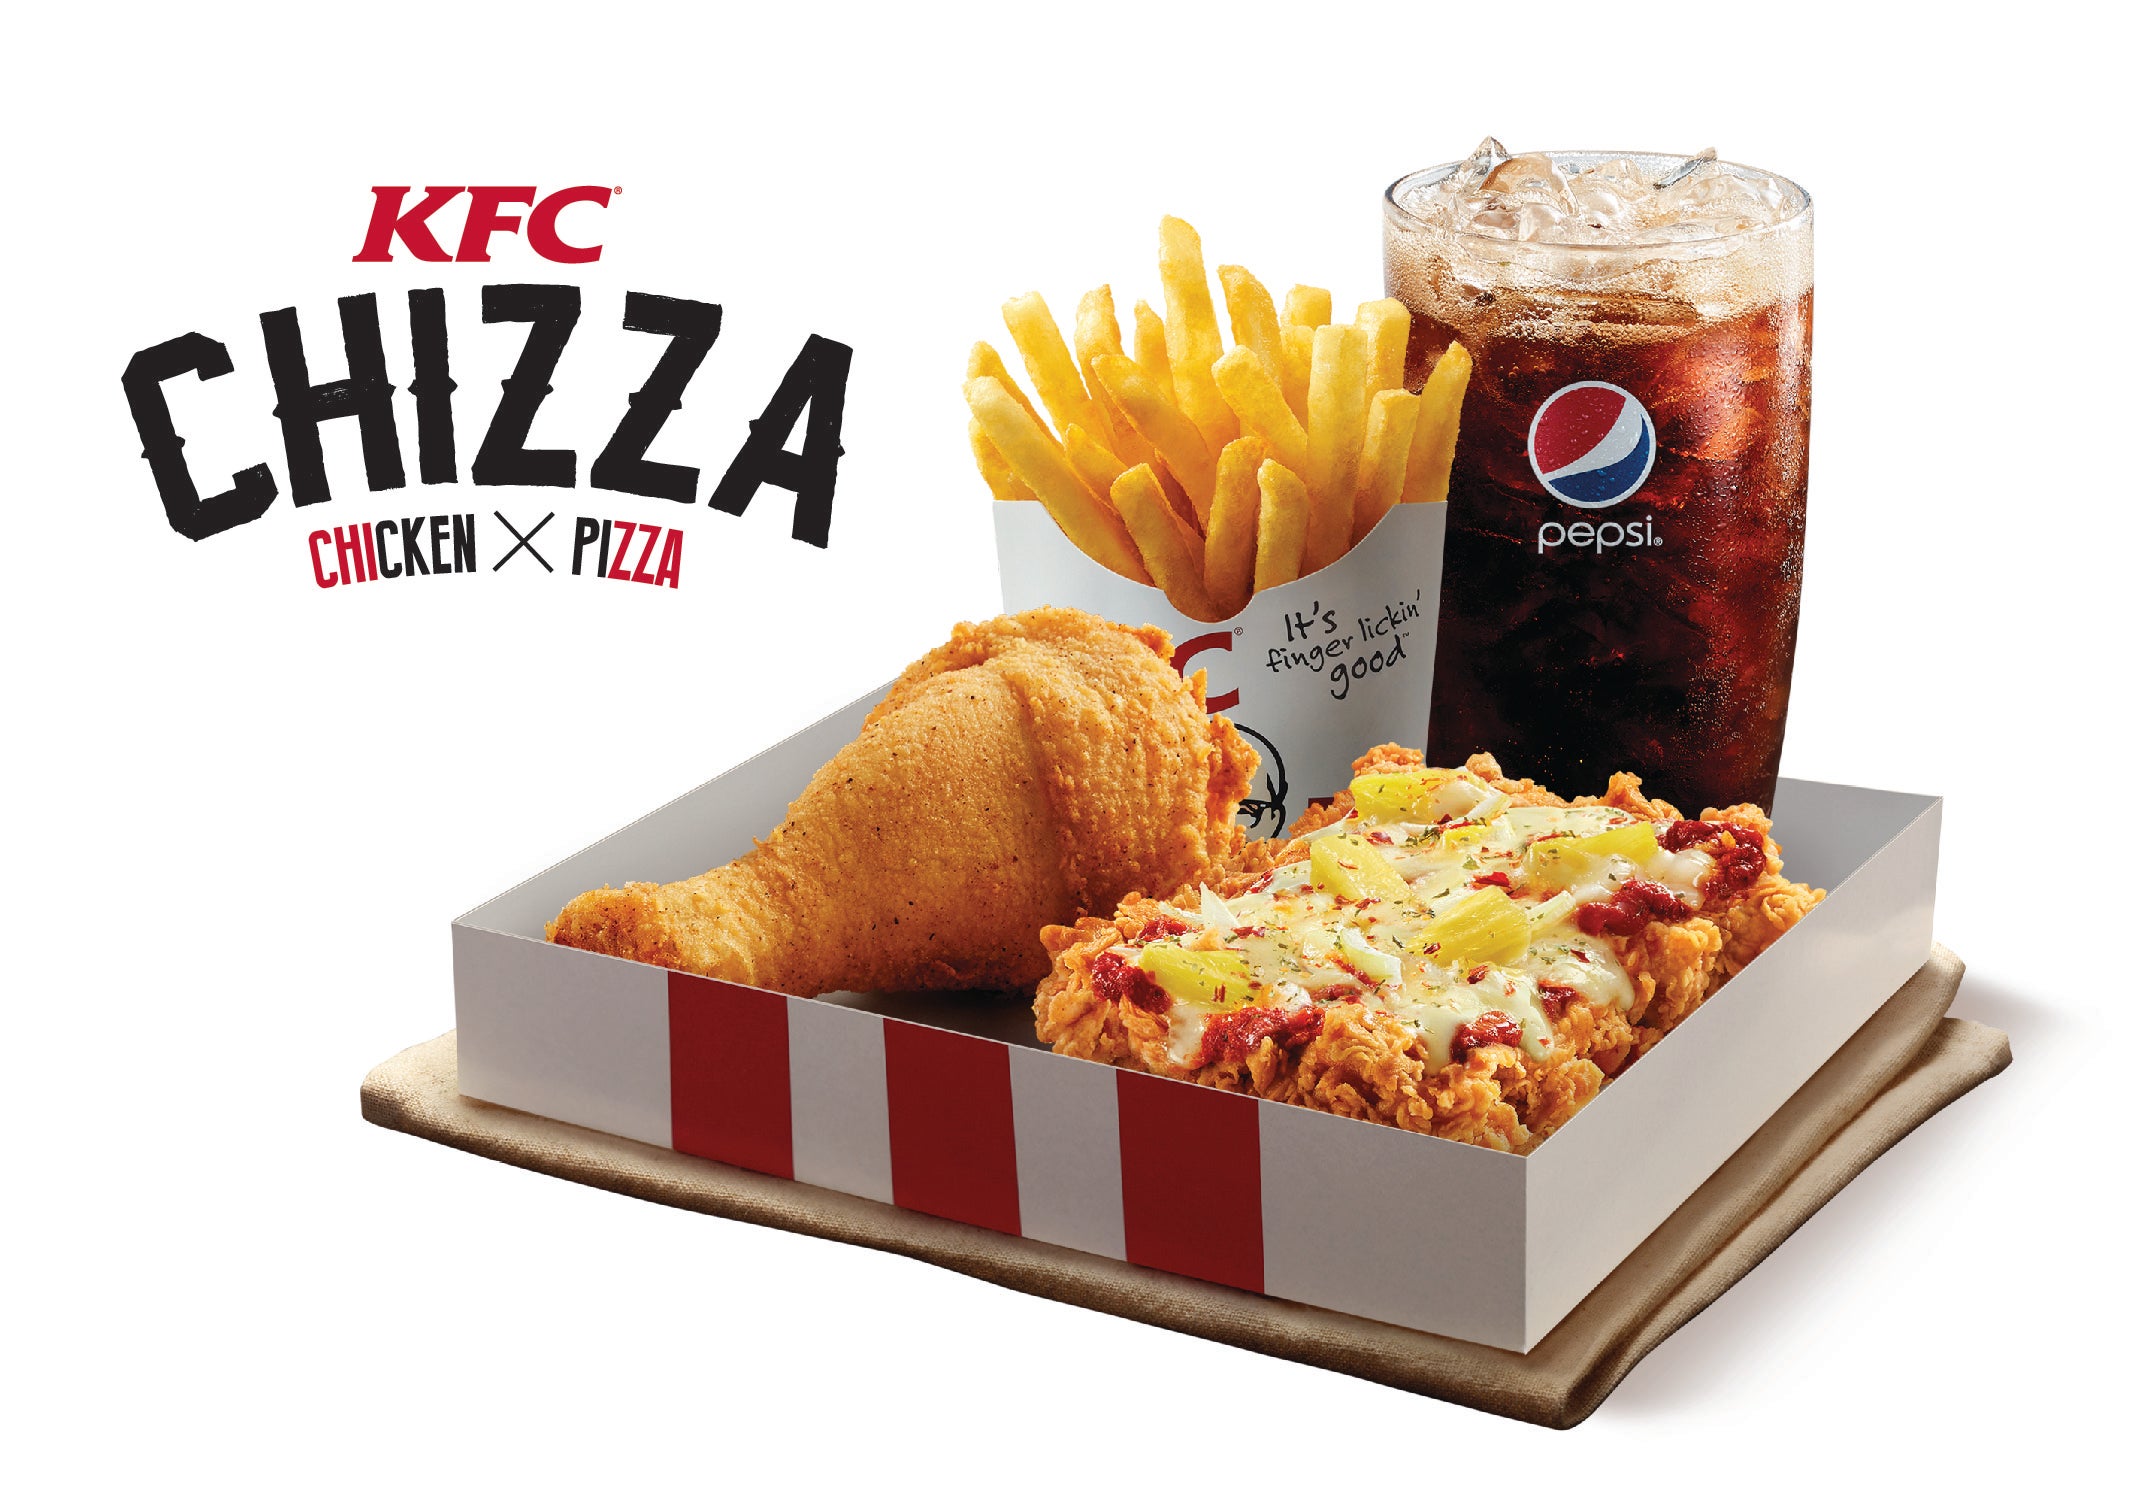 We Tried Kfc's New Chizza Recipe And It's Better Than We Expected! - World Of Buzz 5